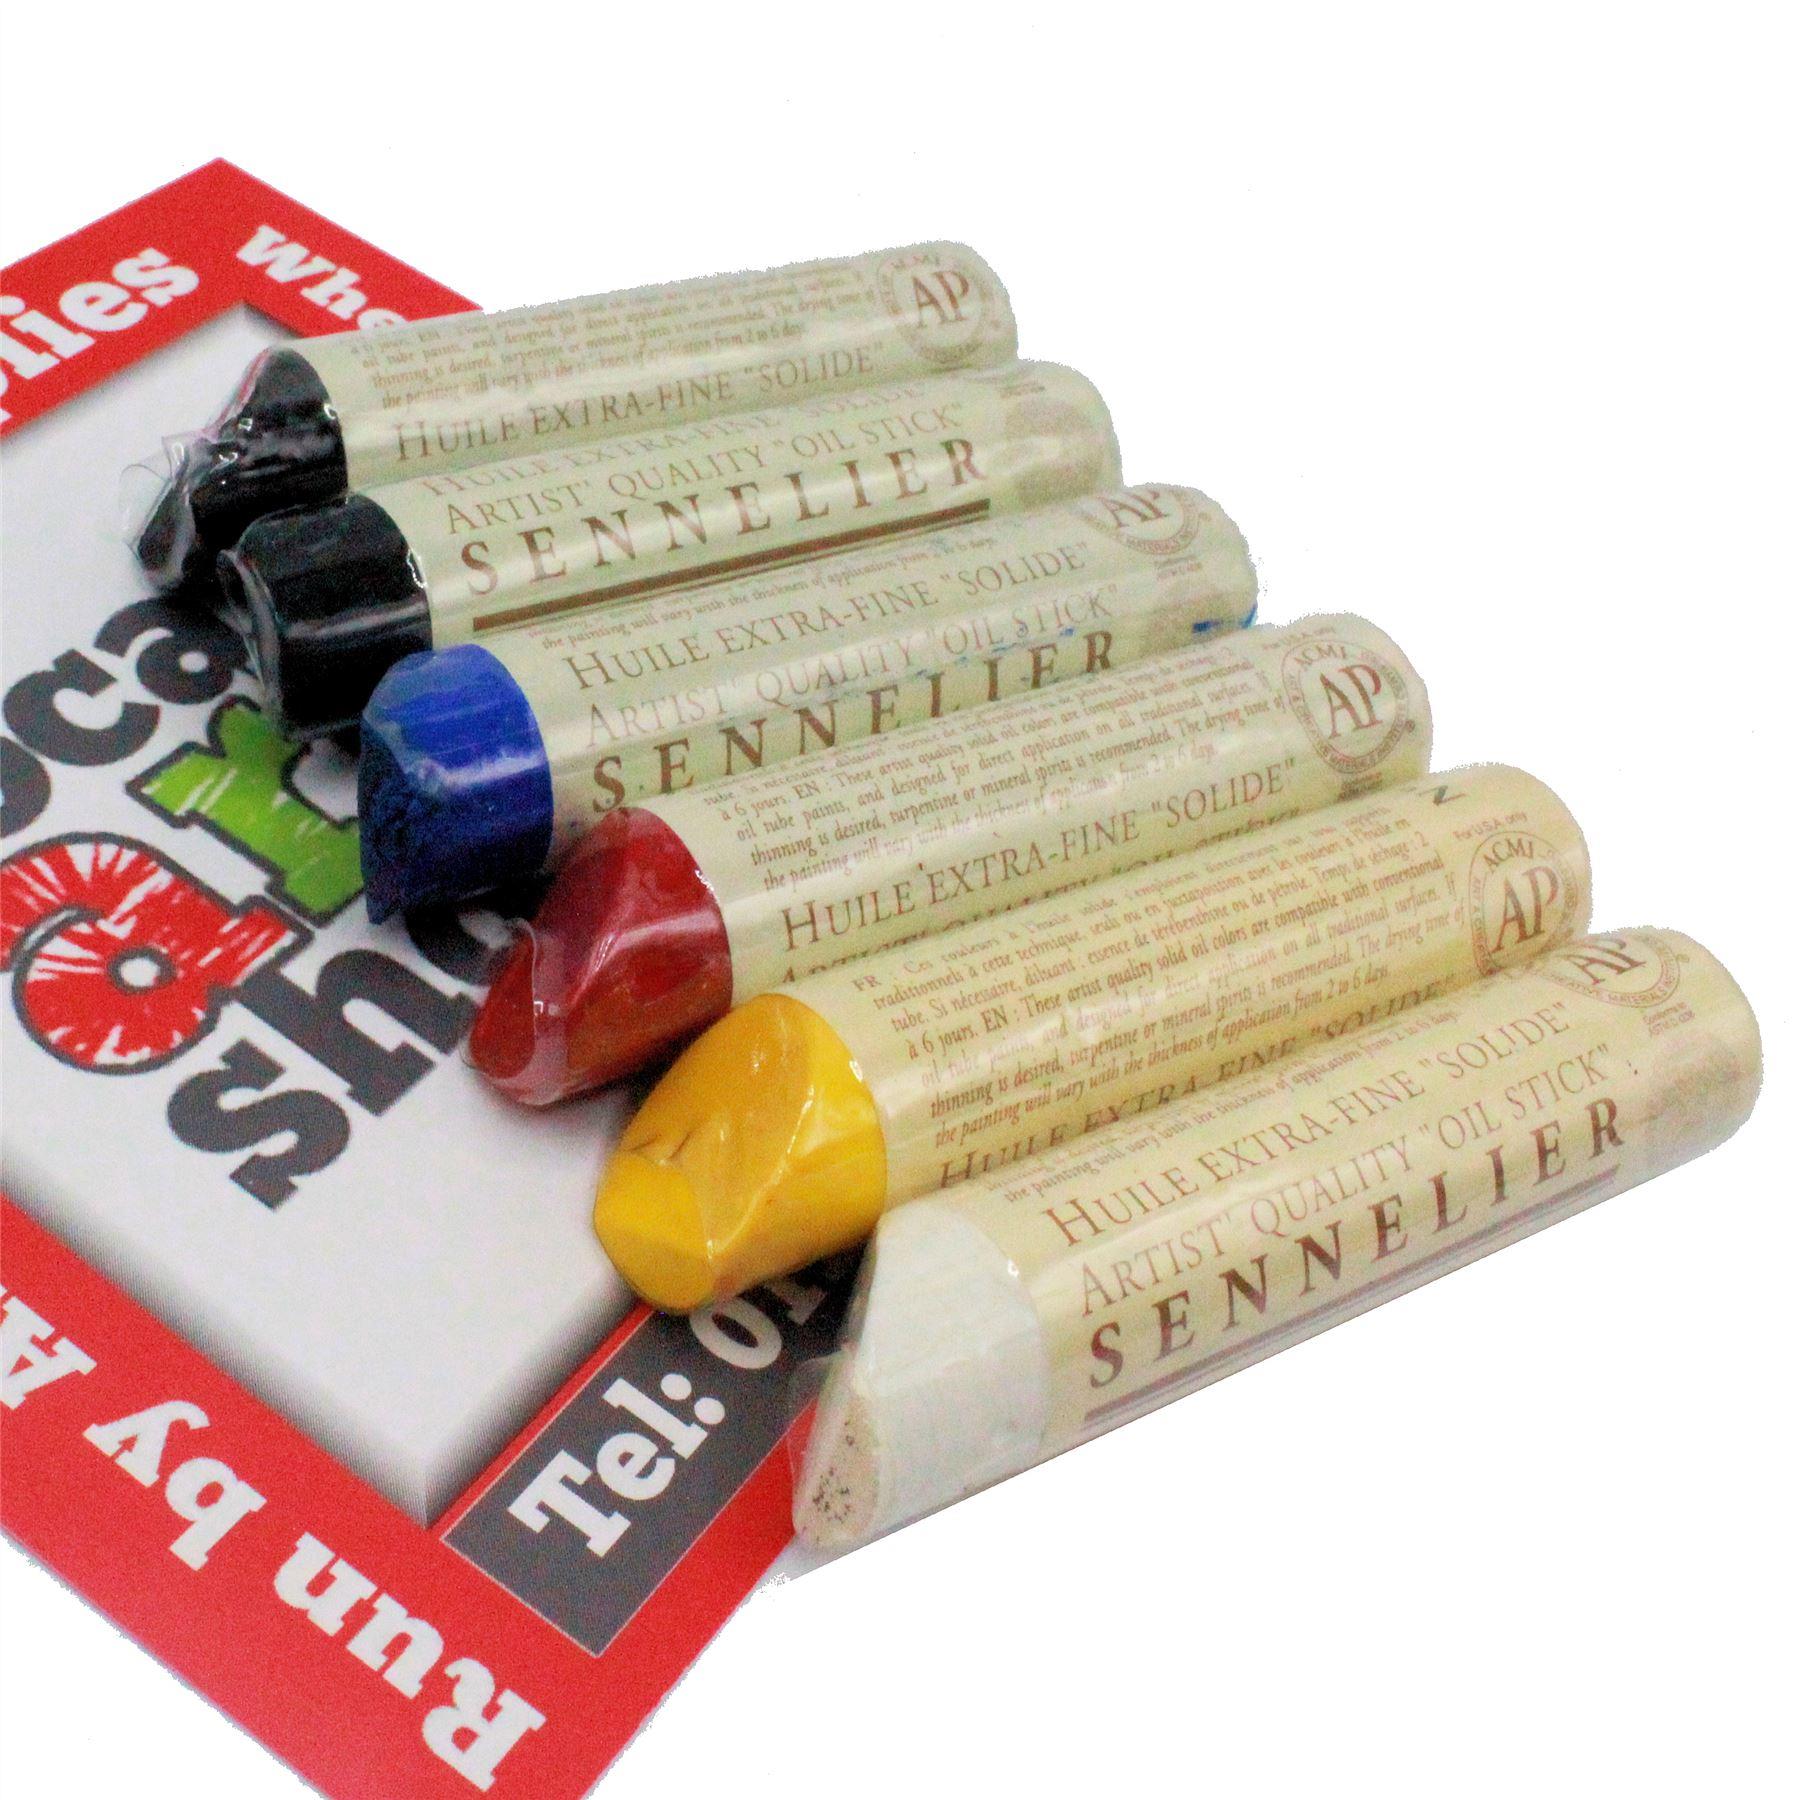 small test pack by Sennelier oil stick set